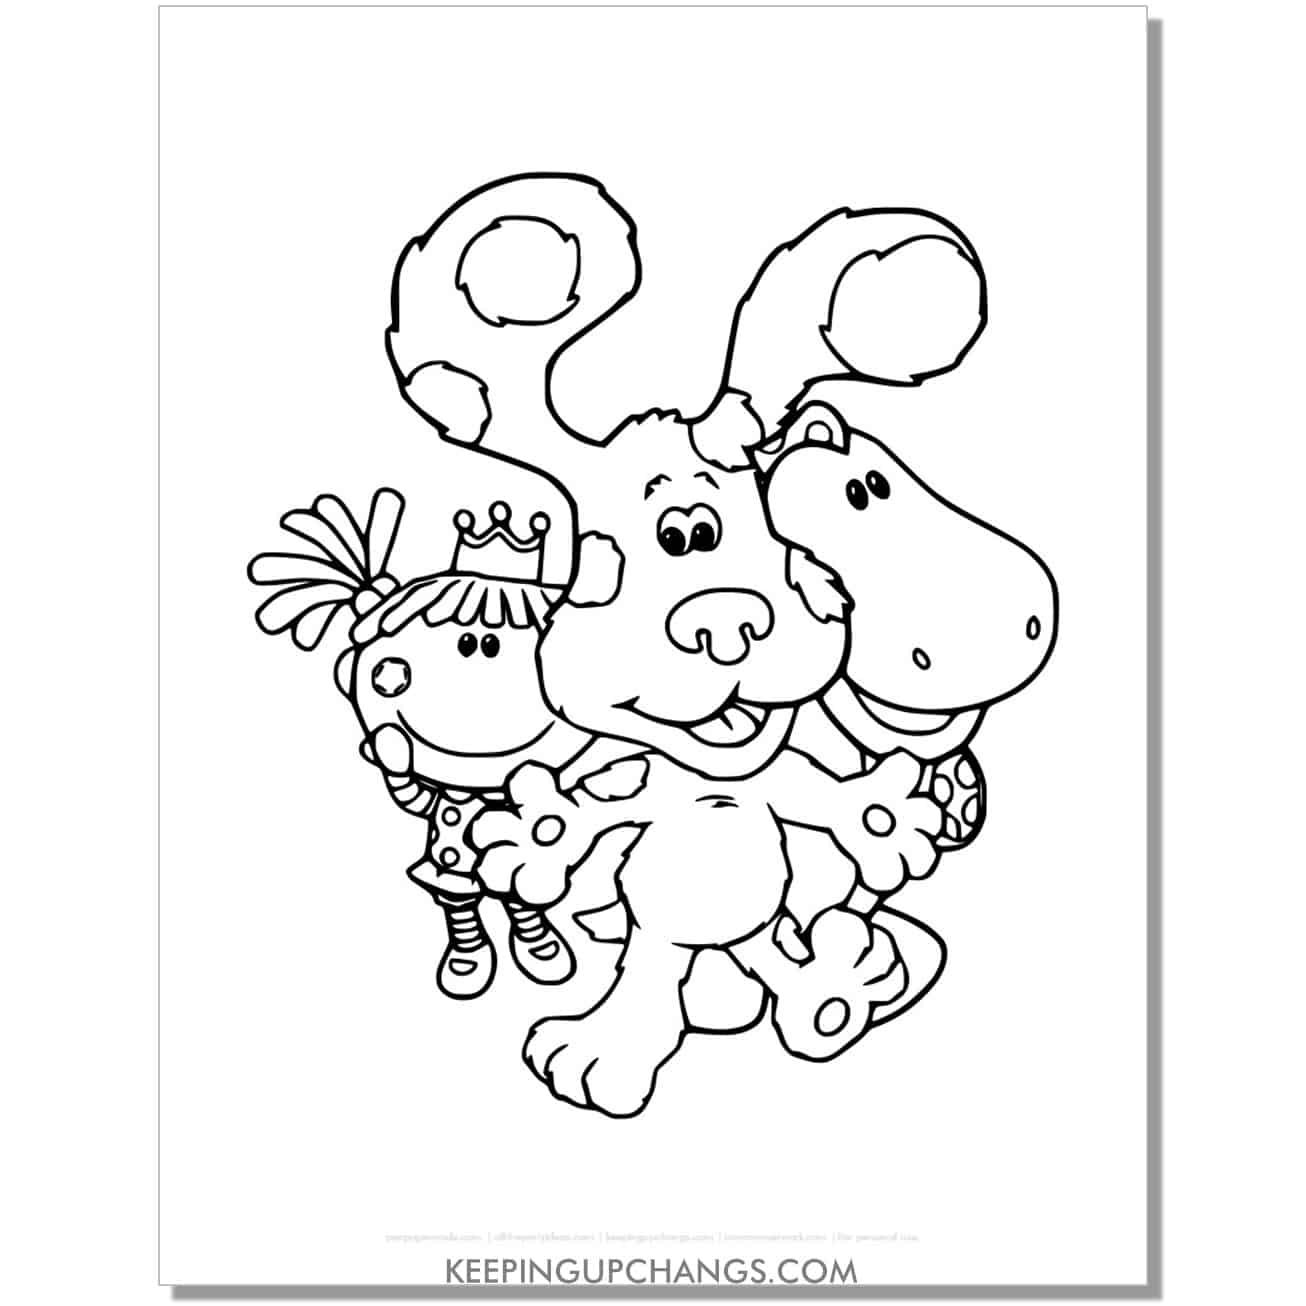 free frederica princess doll, roar e saurus and blue's clues coloring page, sheet.